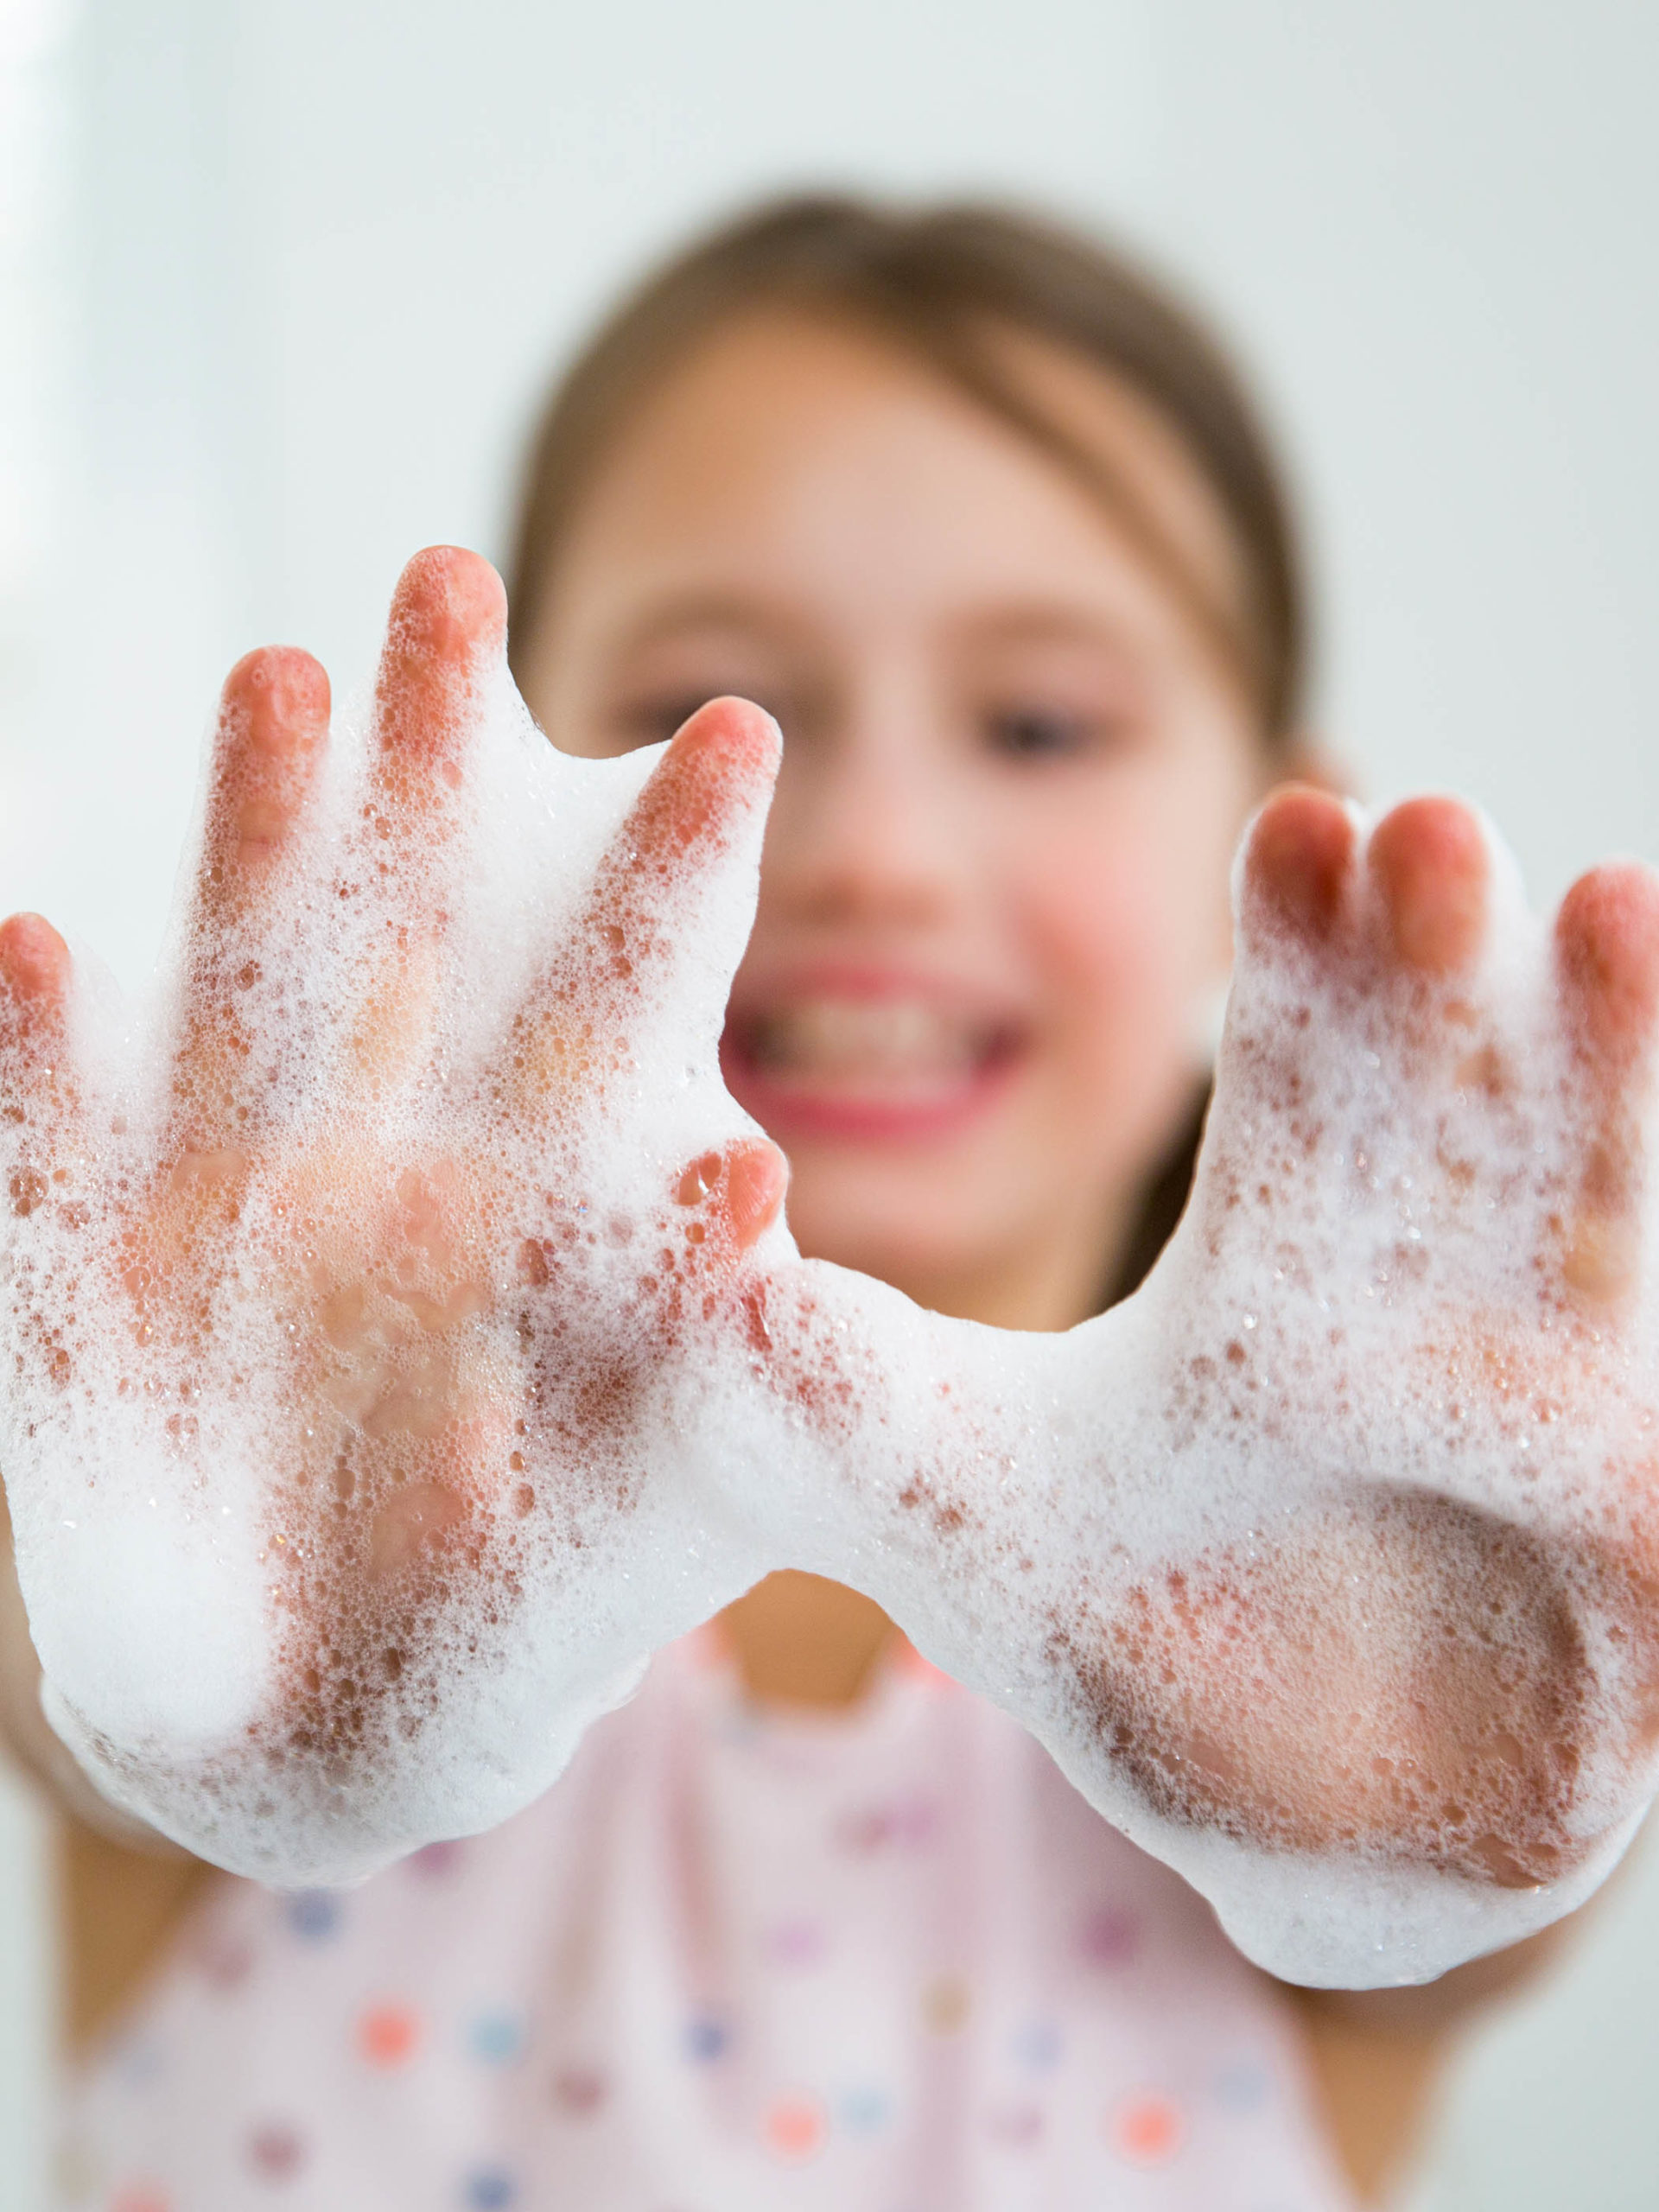 Little girl washing hands with water and soap in bathroom